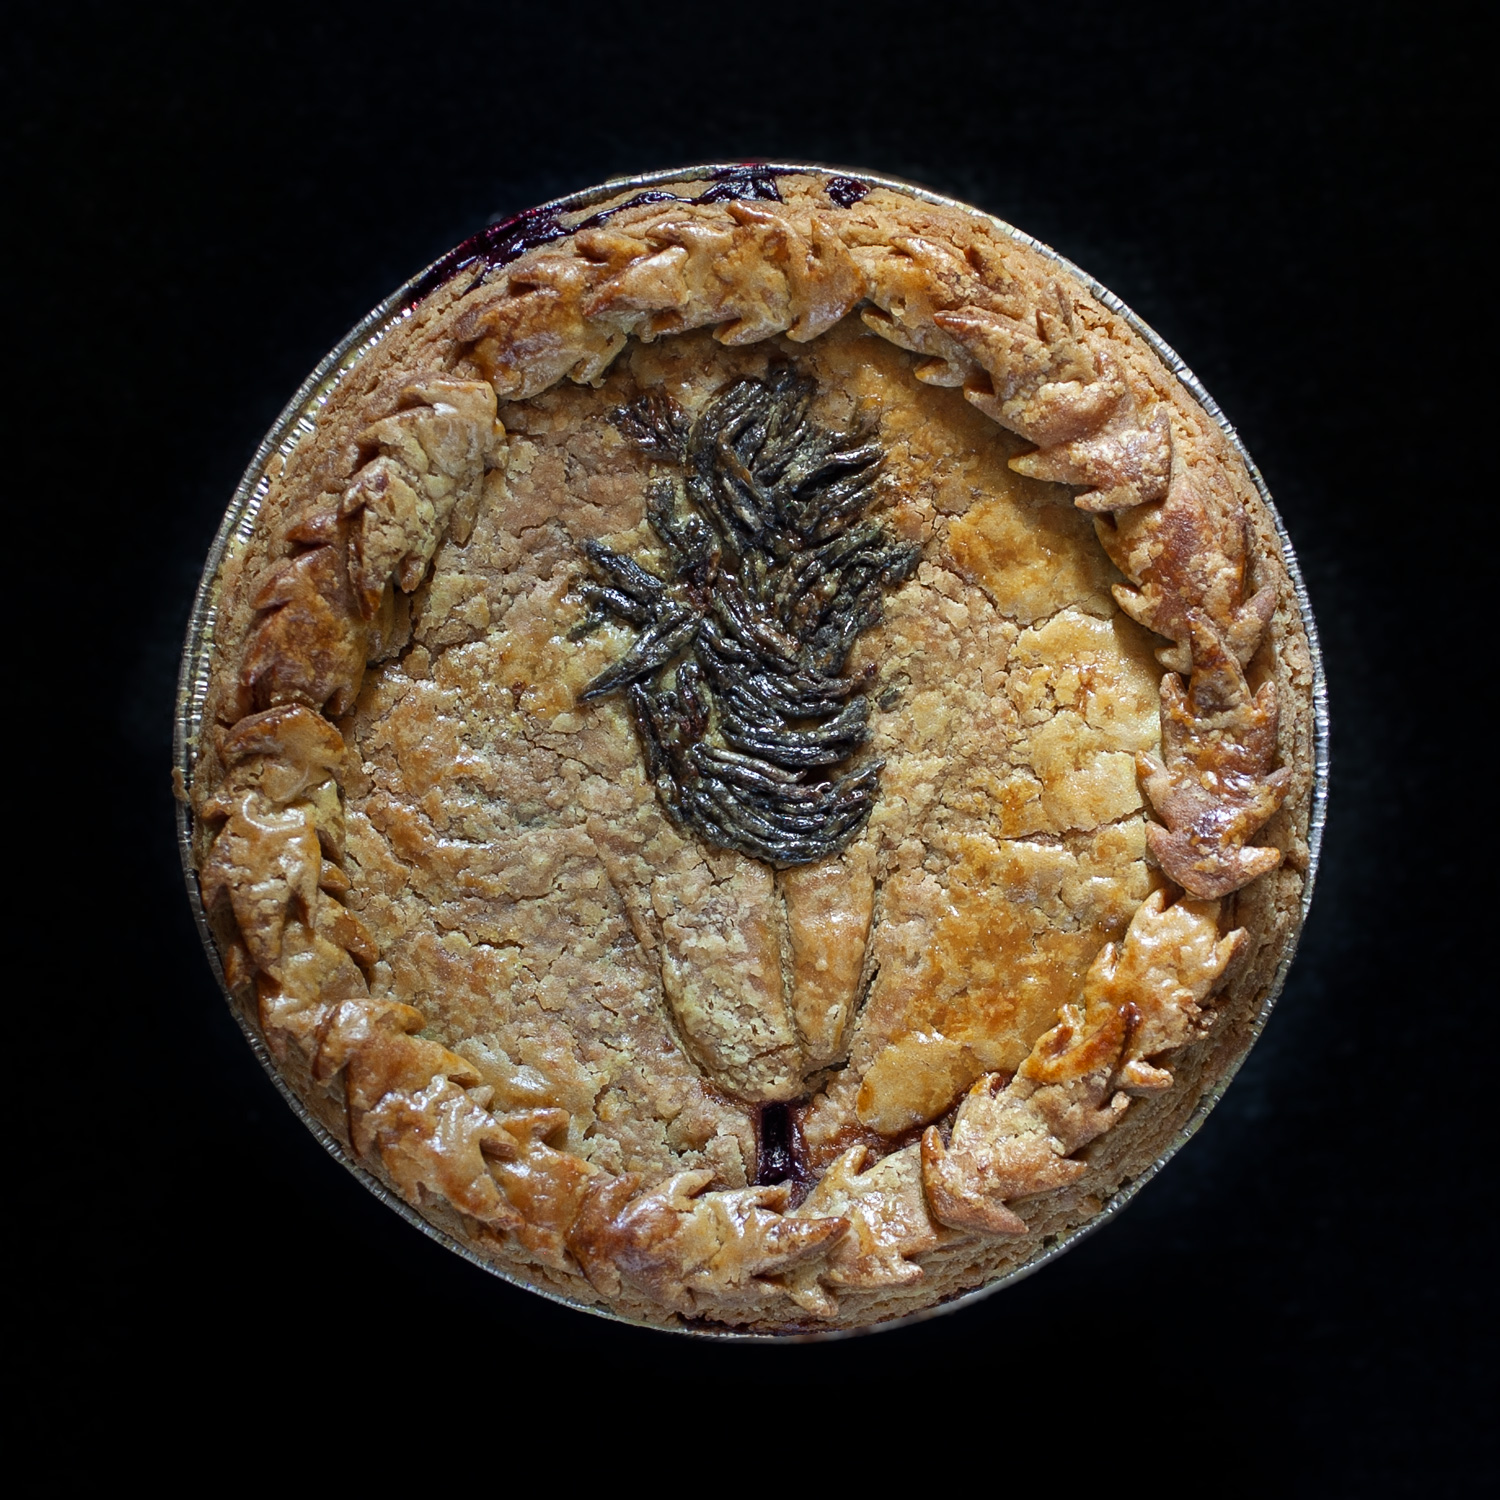 six inch baked pie with pie crust leaves around the edge and hand sculpted pie crust art that looks like a vulva with brown pubic hair